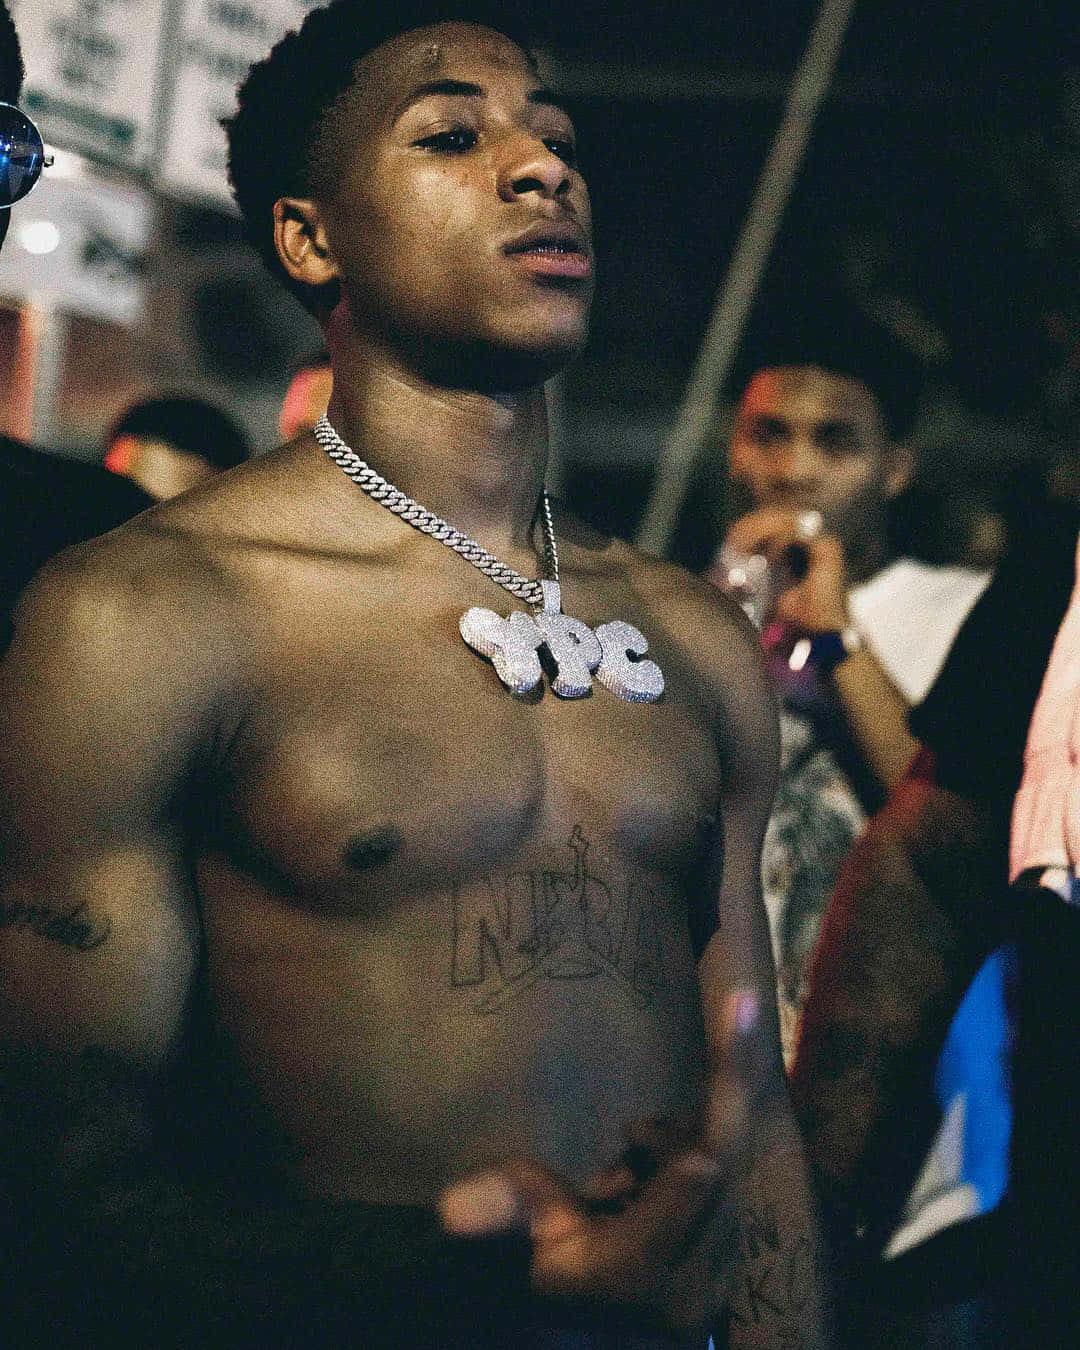 This on the never broke again website. Youngboy wearin the chain